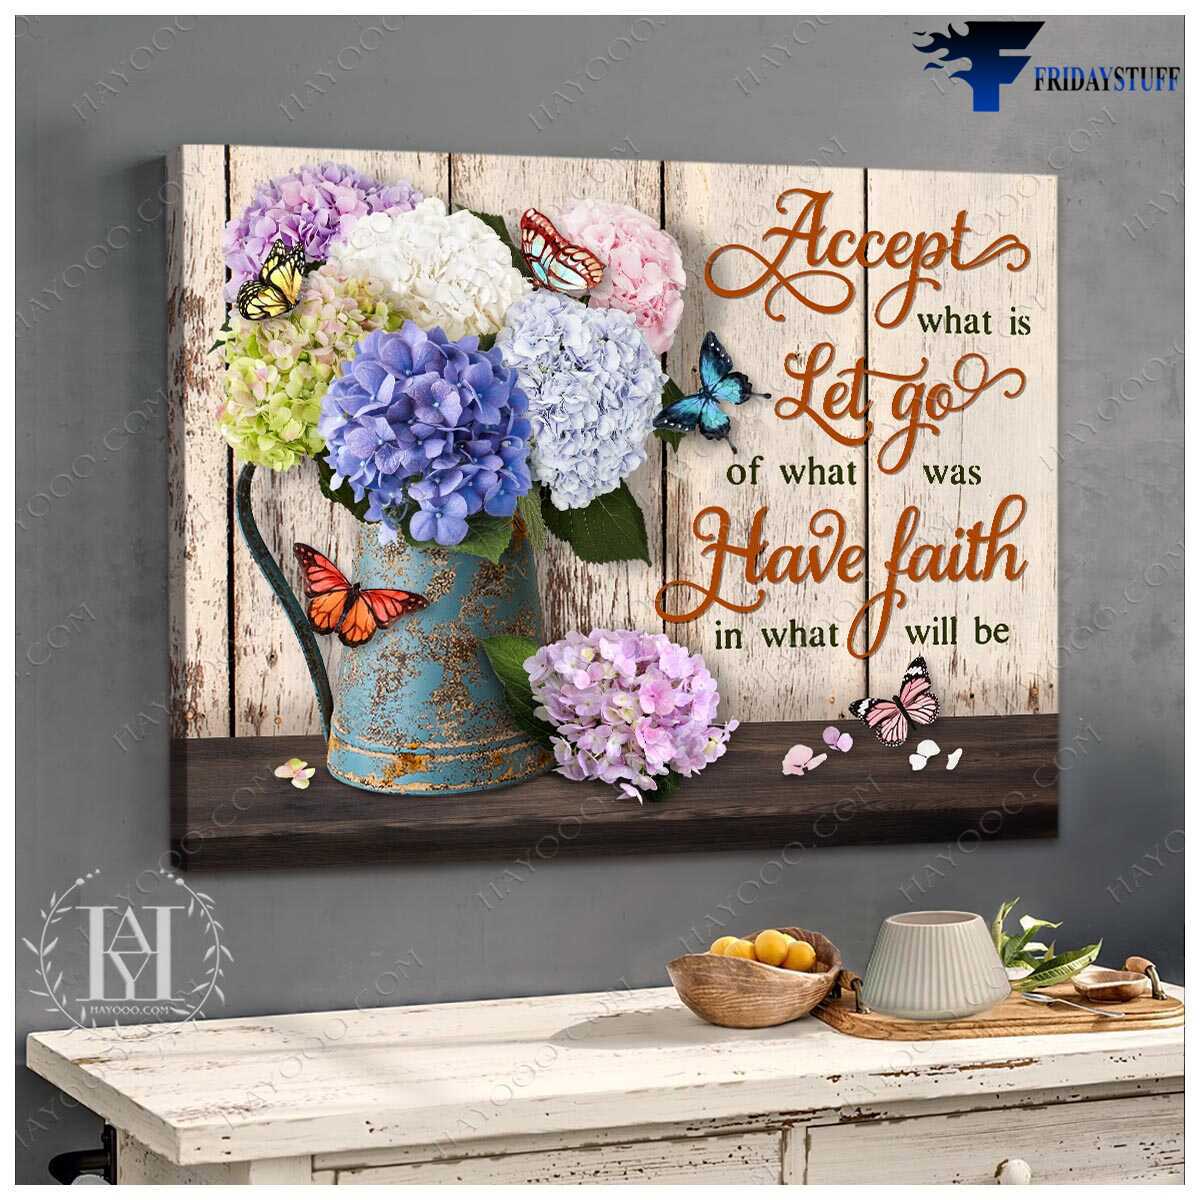 Hydrangeas Flower, Butterfly Flower - Accept What Is, Let Go Of What Was, Have Faith In What Will Be